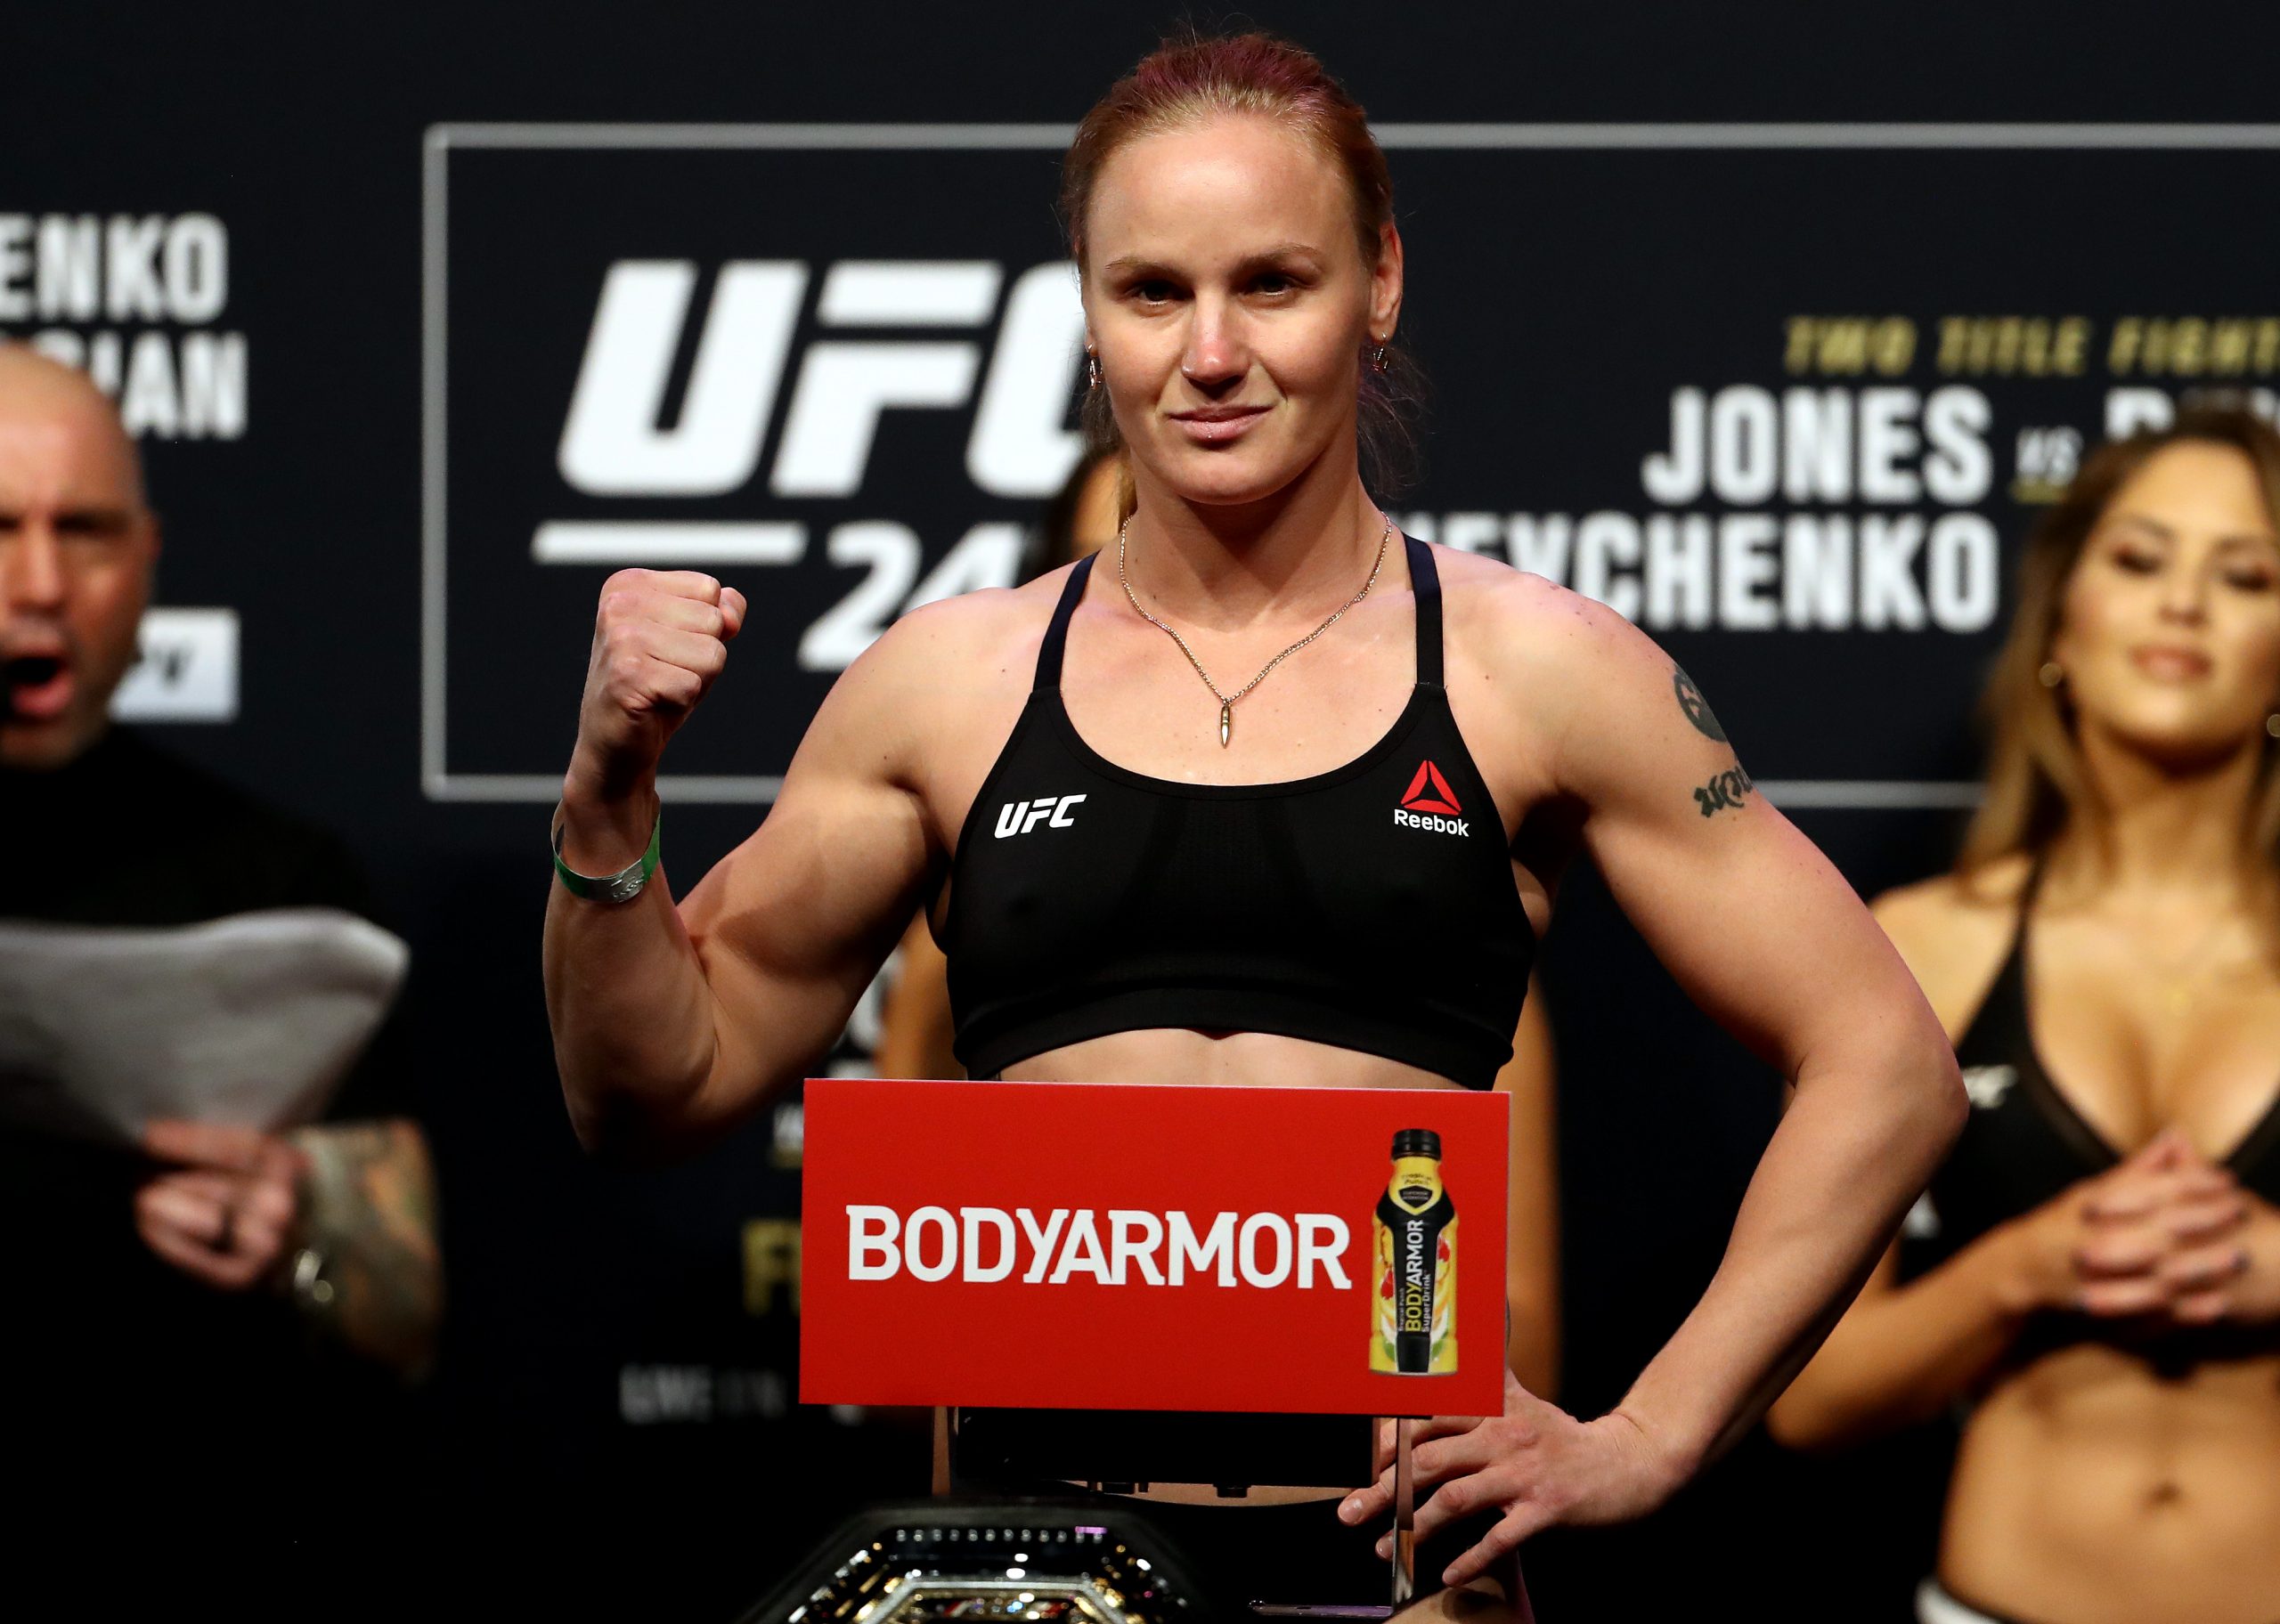 Valentina Shevchenko is one of the top female stars in the UFC